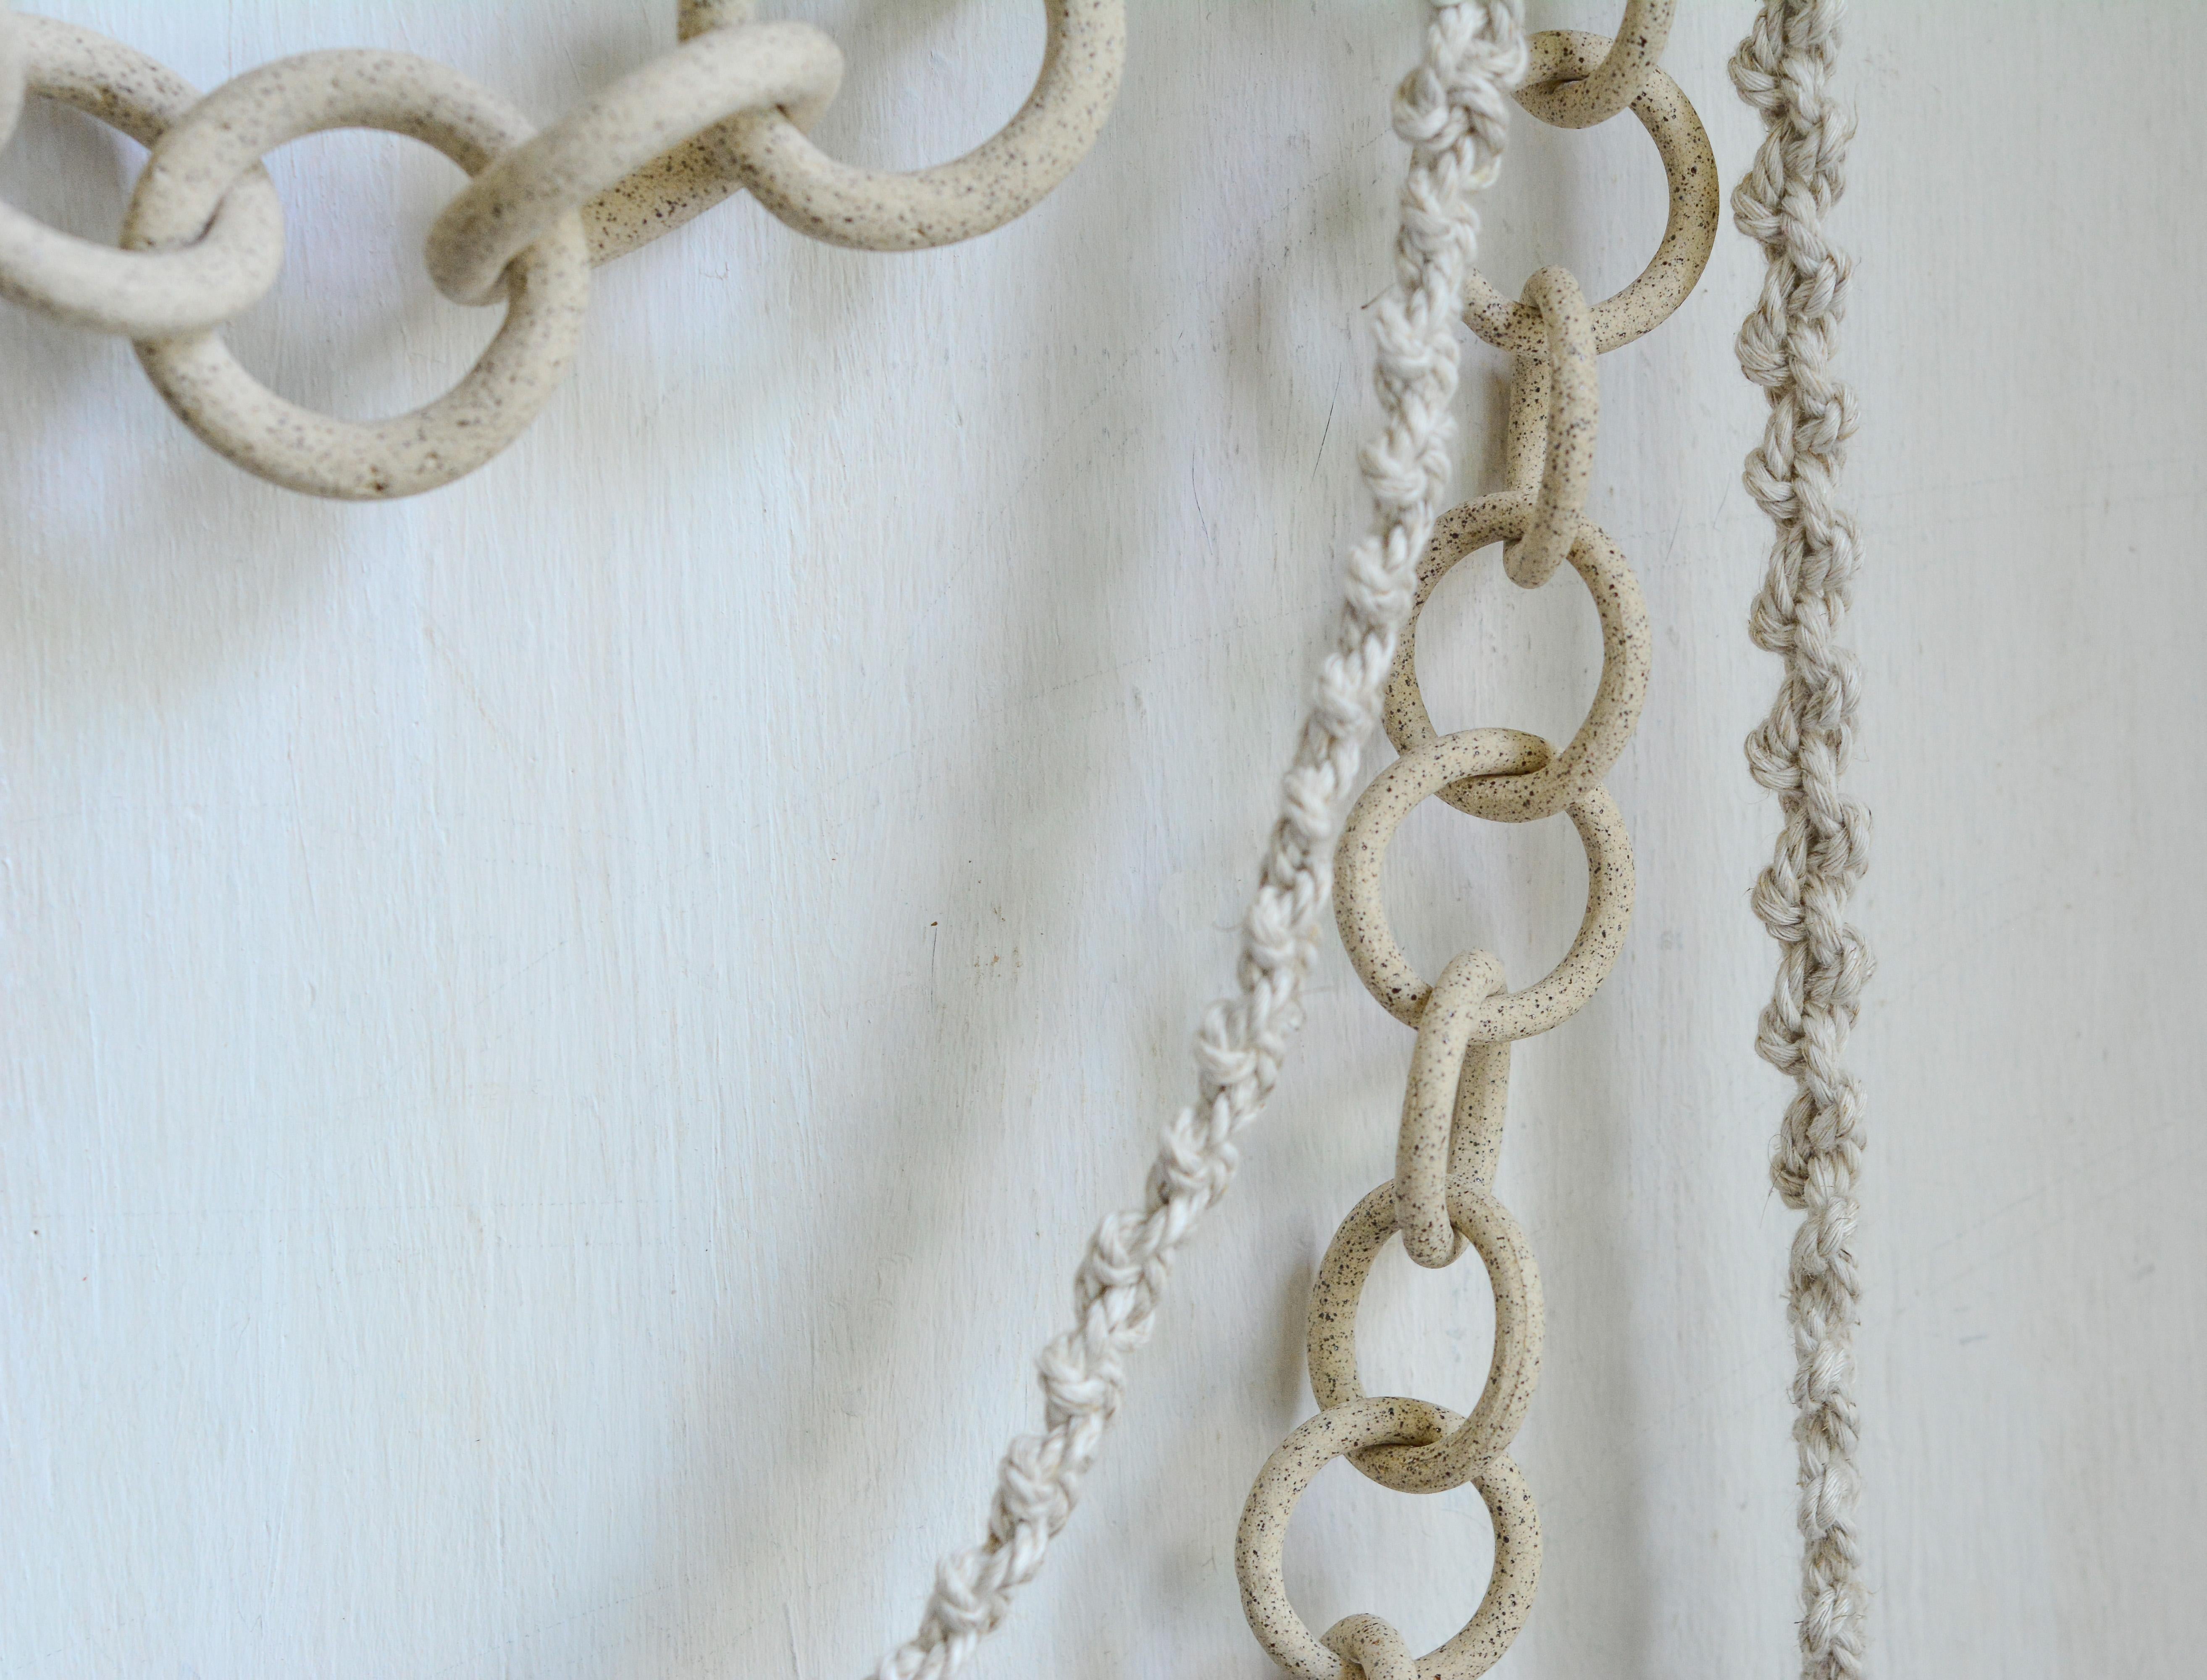 Hand-Crafted Ceramic Link Chain Wall Sculpture